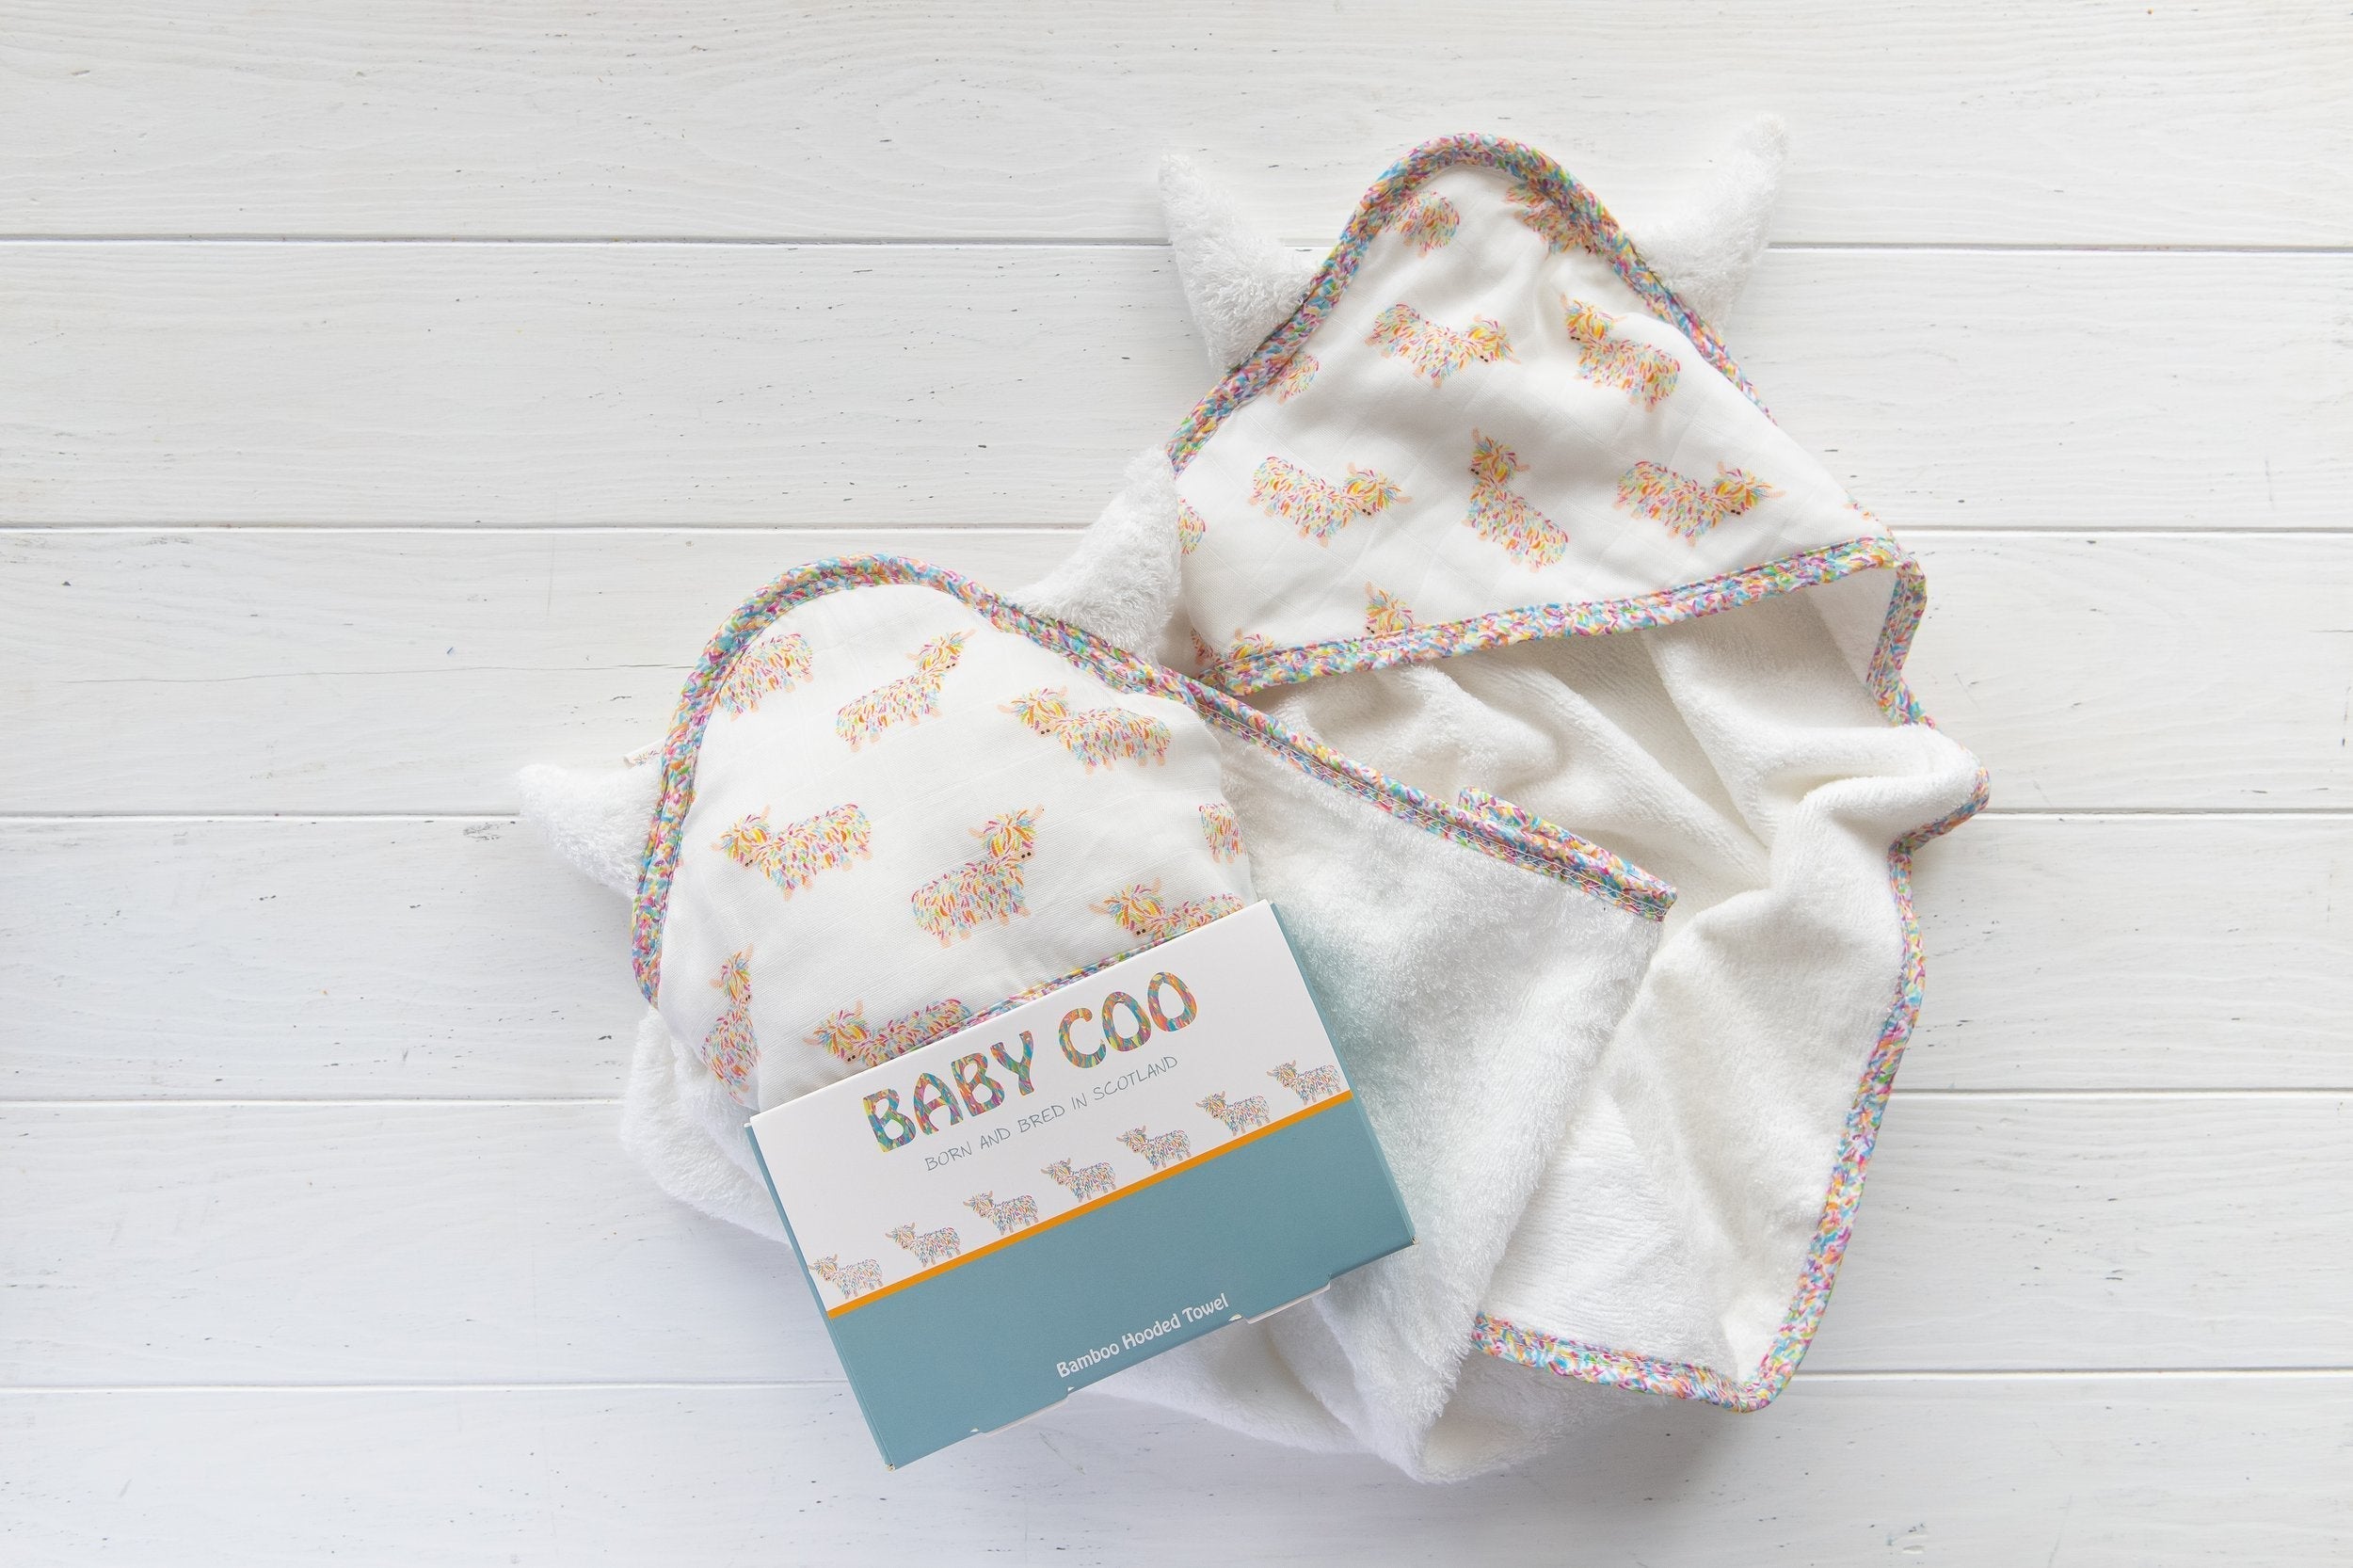 Baby Coo Hooded Towel | Hairy Coo | Scottish Creations